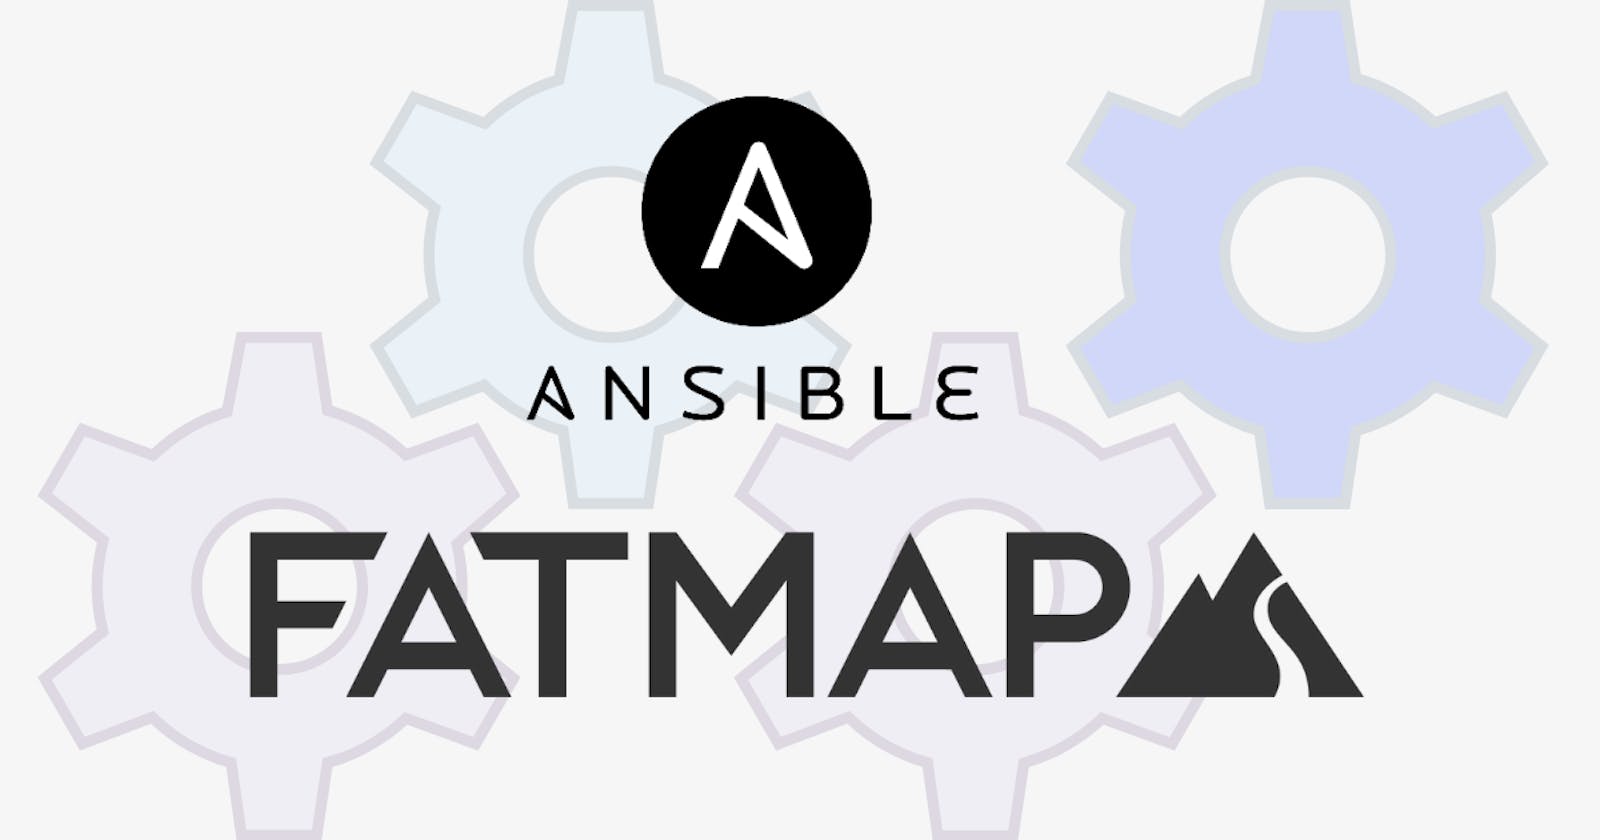 How FATMAP increase the speed of Application Deployment with ANSIBLE?